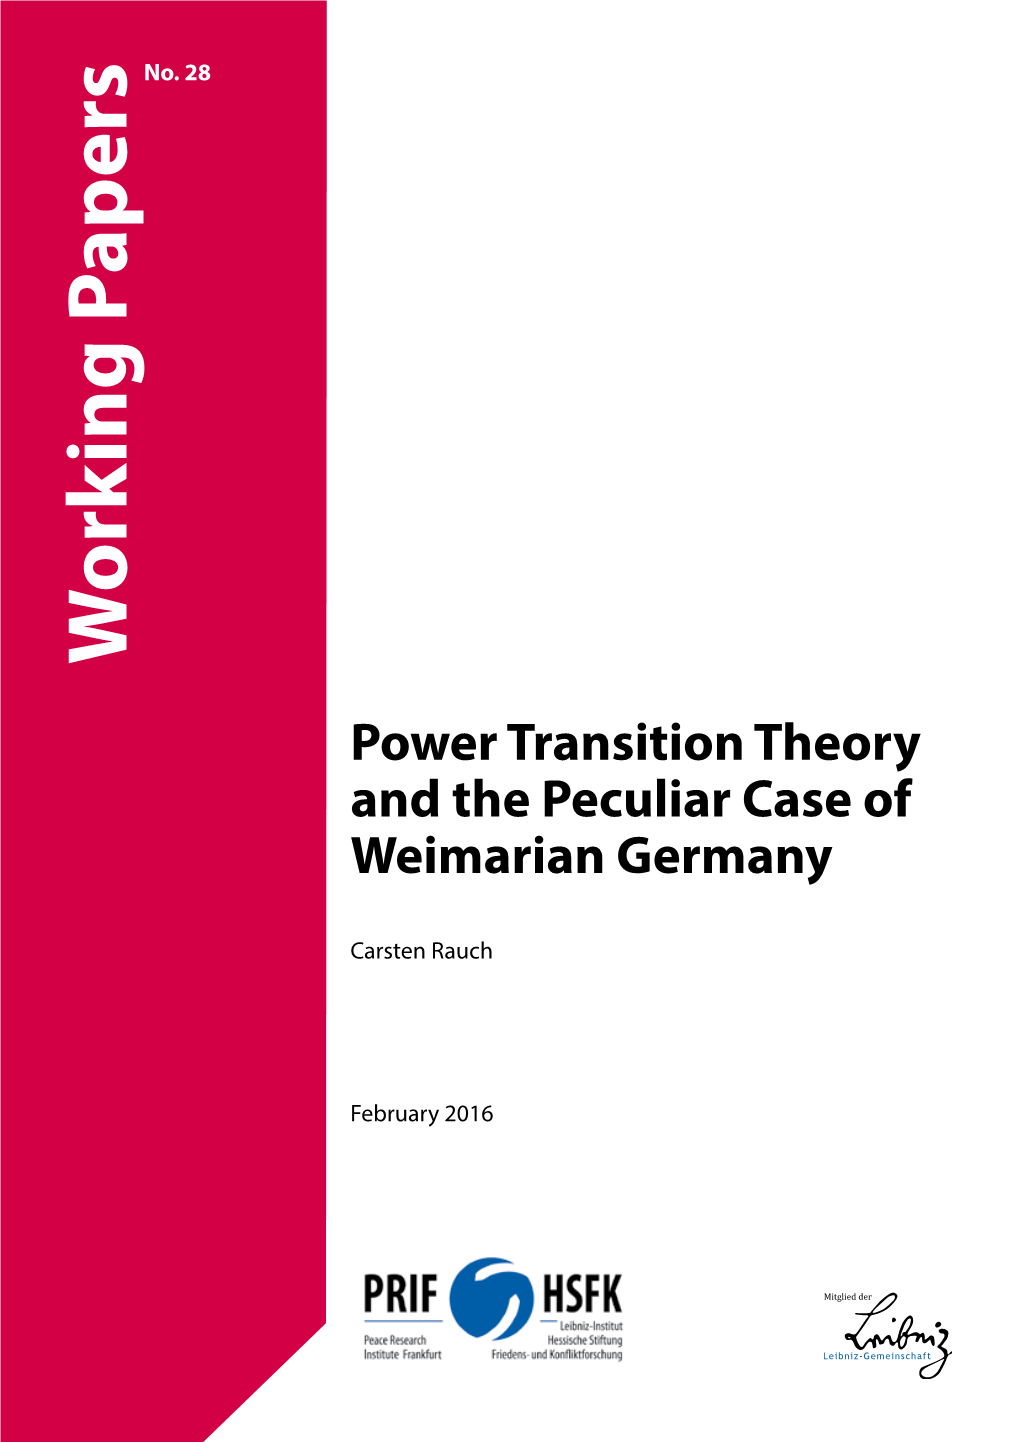 Power Transition Theory and the Peculiar Case of Weimarian Germany